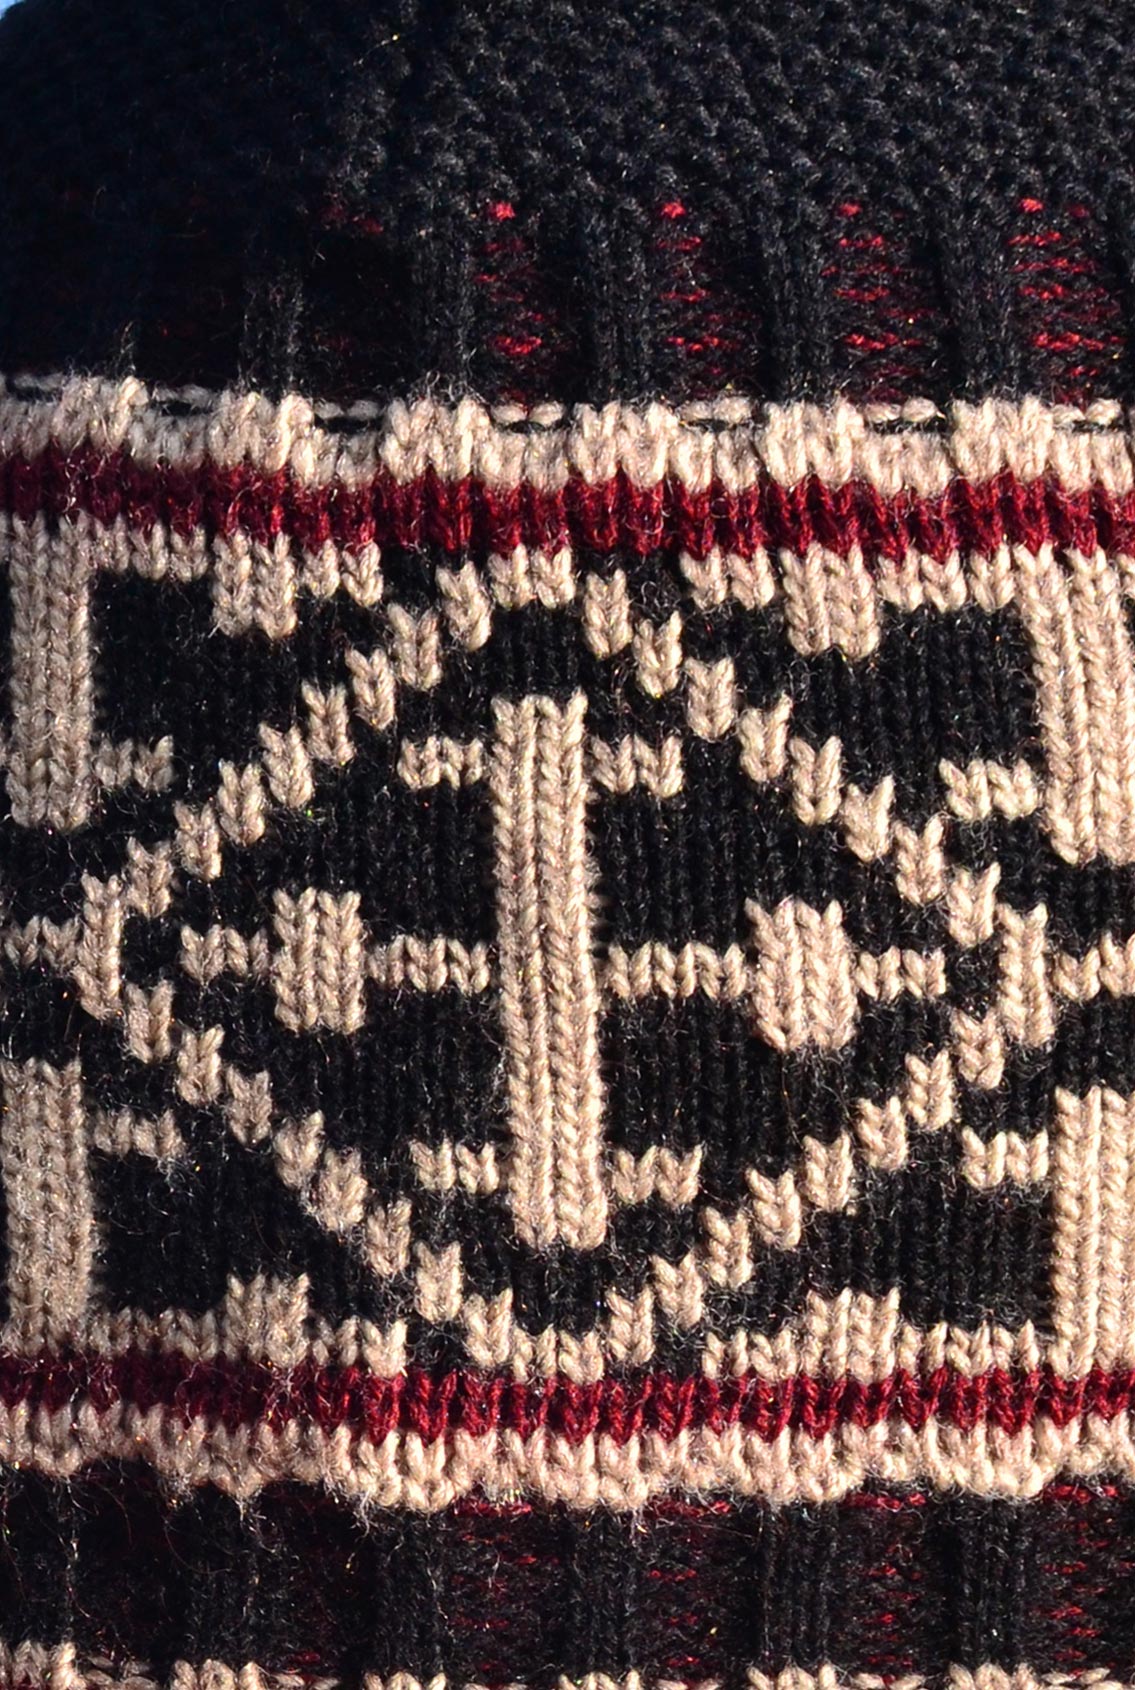 hat with cross